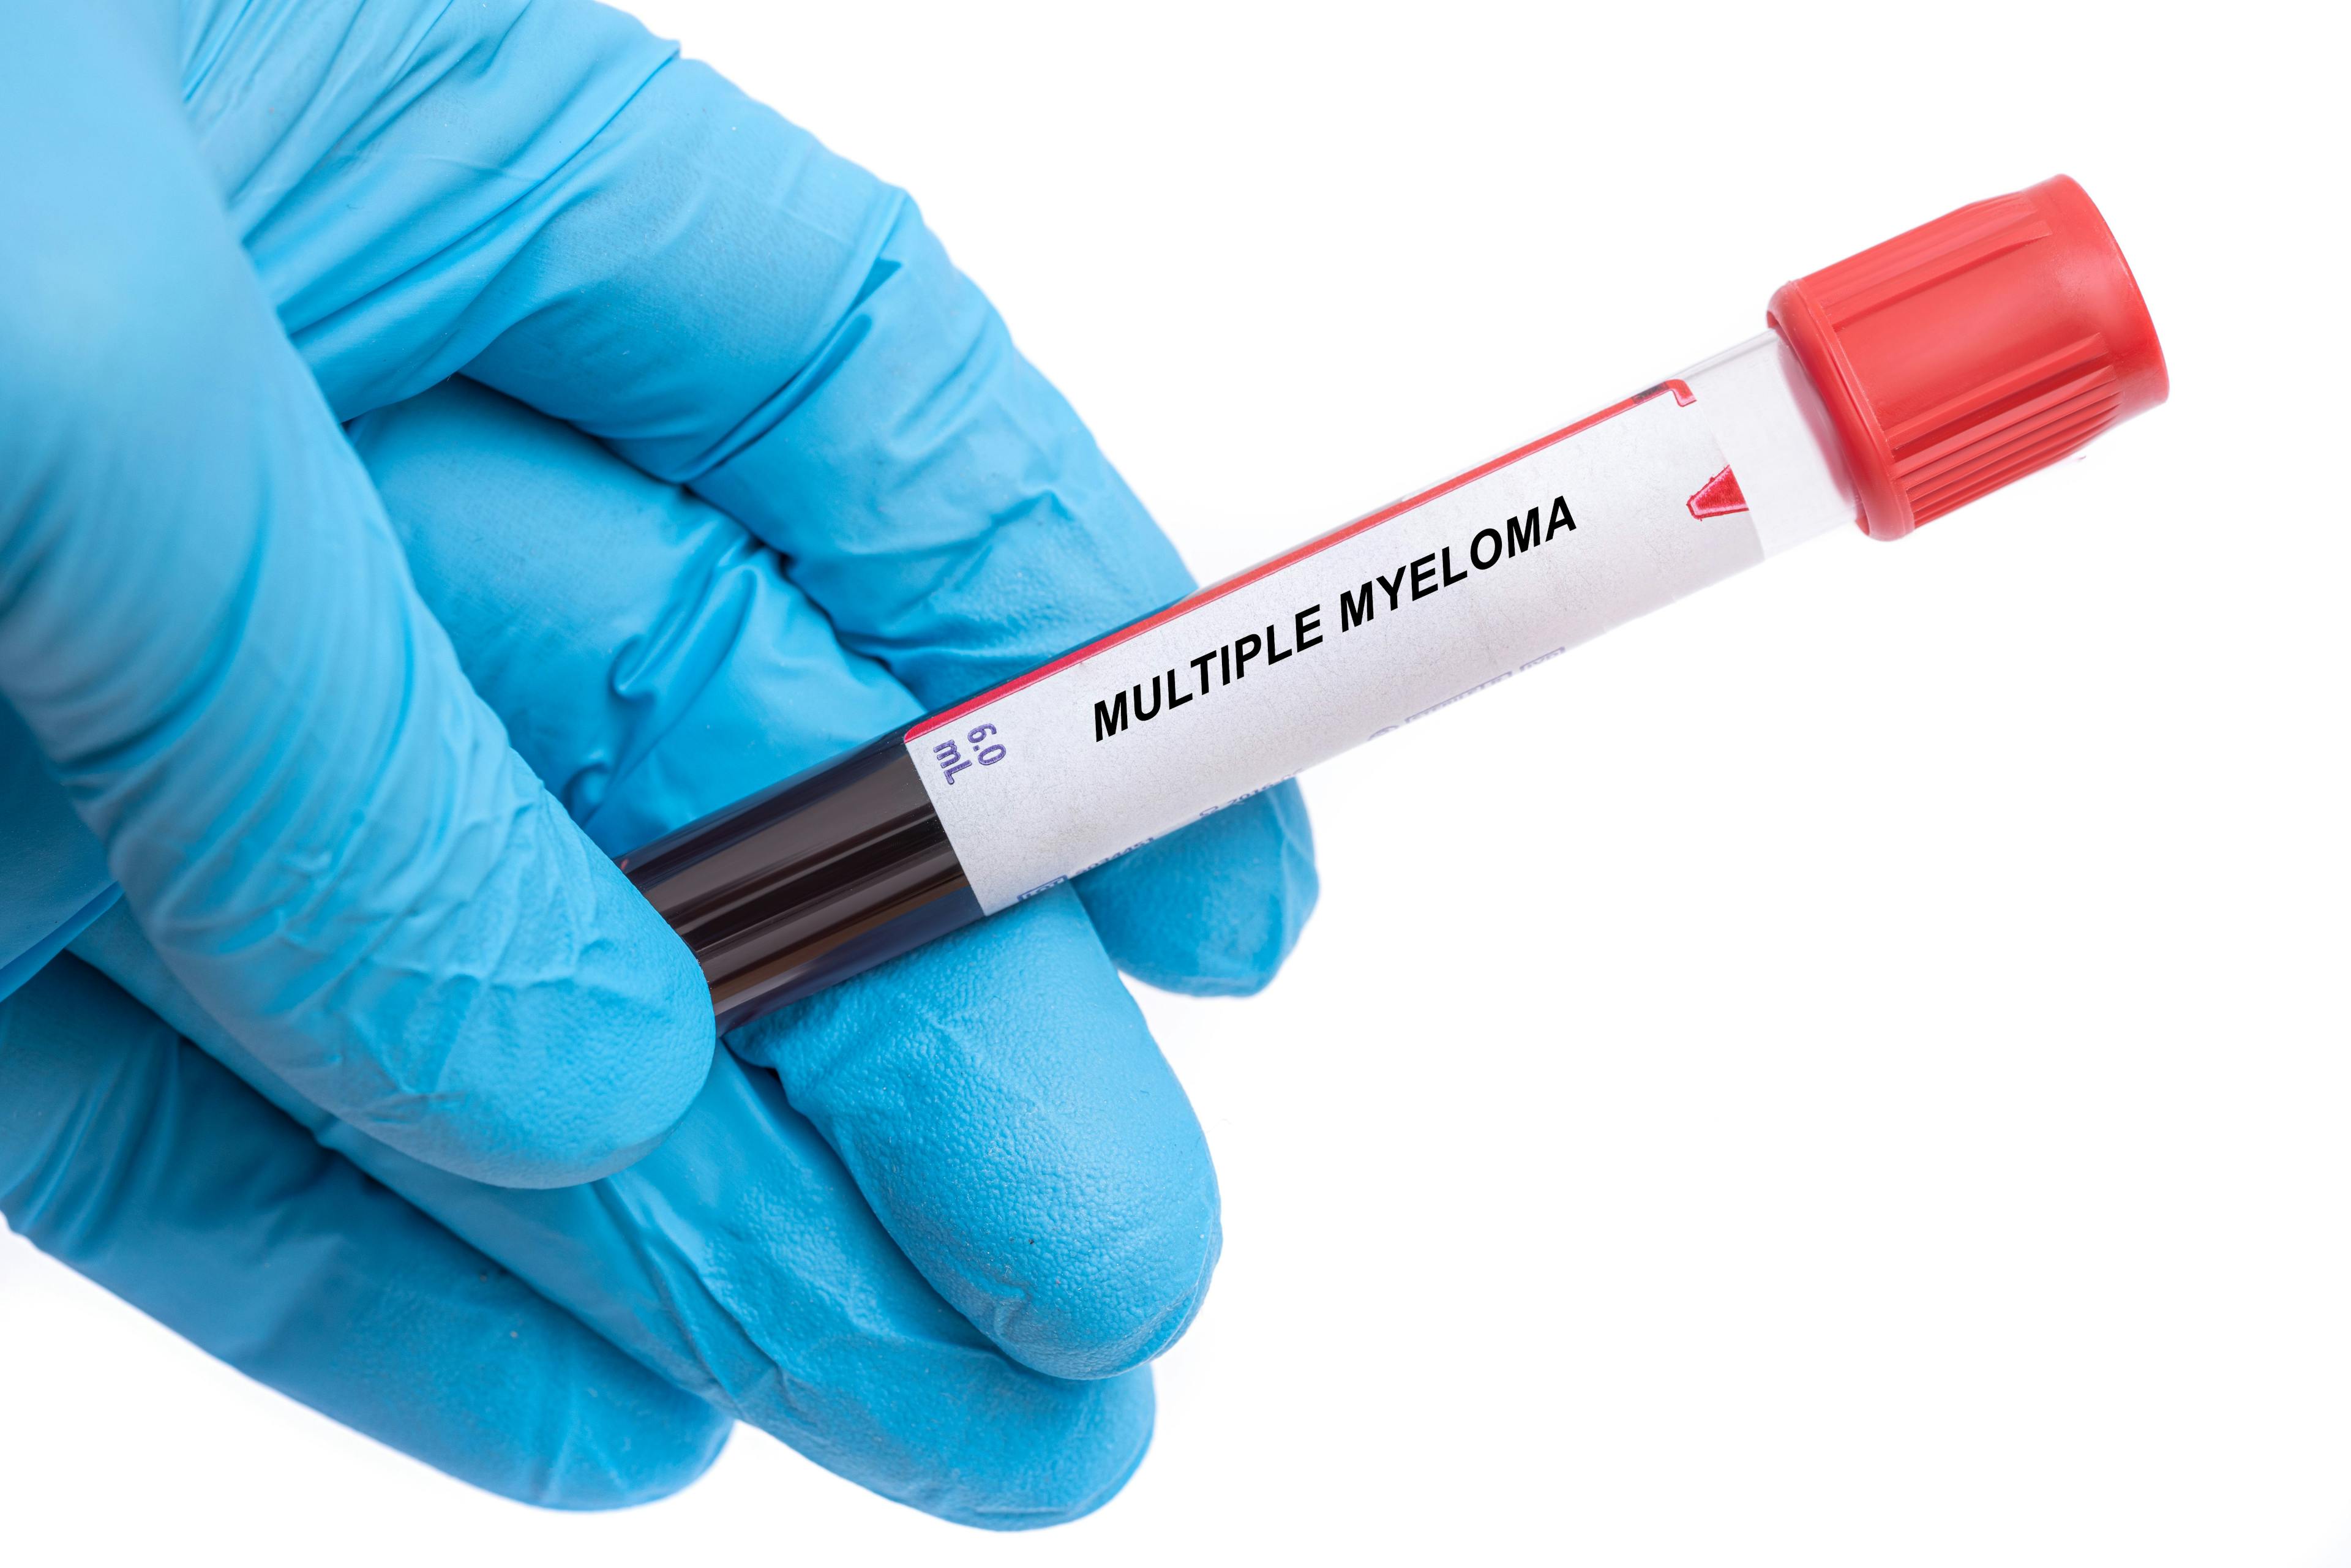 Blood sample positive for multiple myeloma -- Image credit: luchschenF | stock.adobe.com